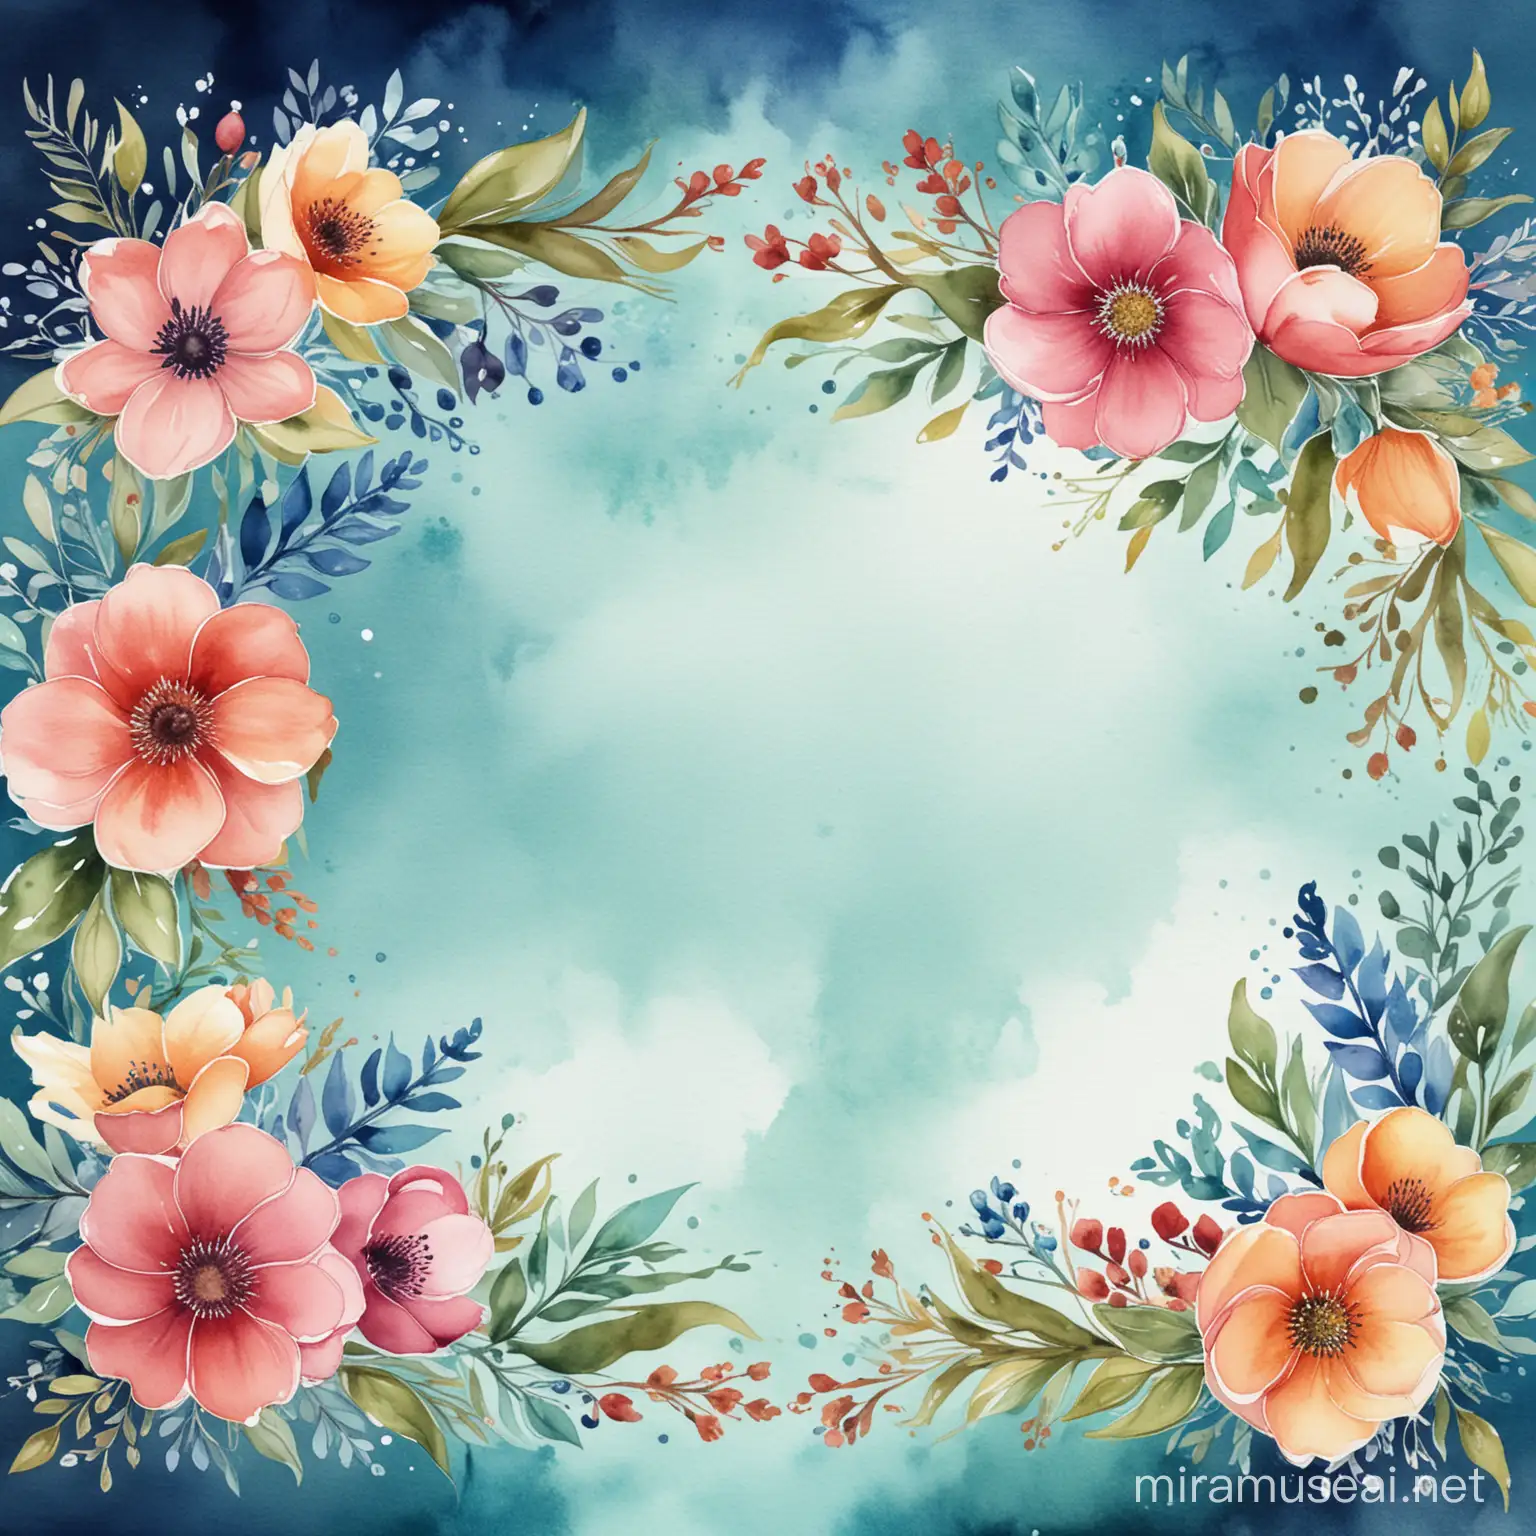 create a water color floral border background for my design project 
